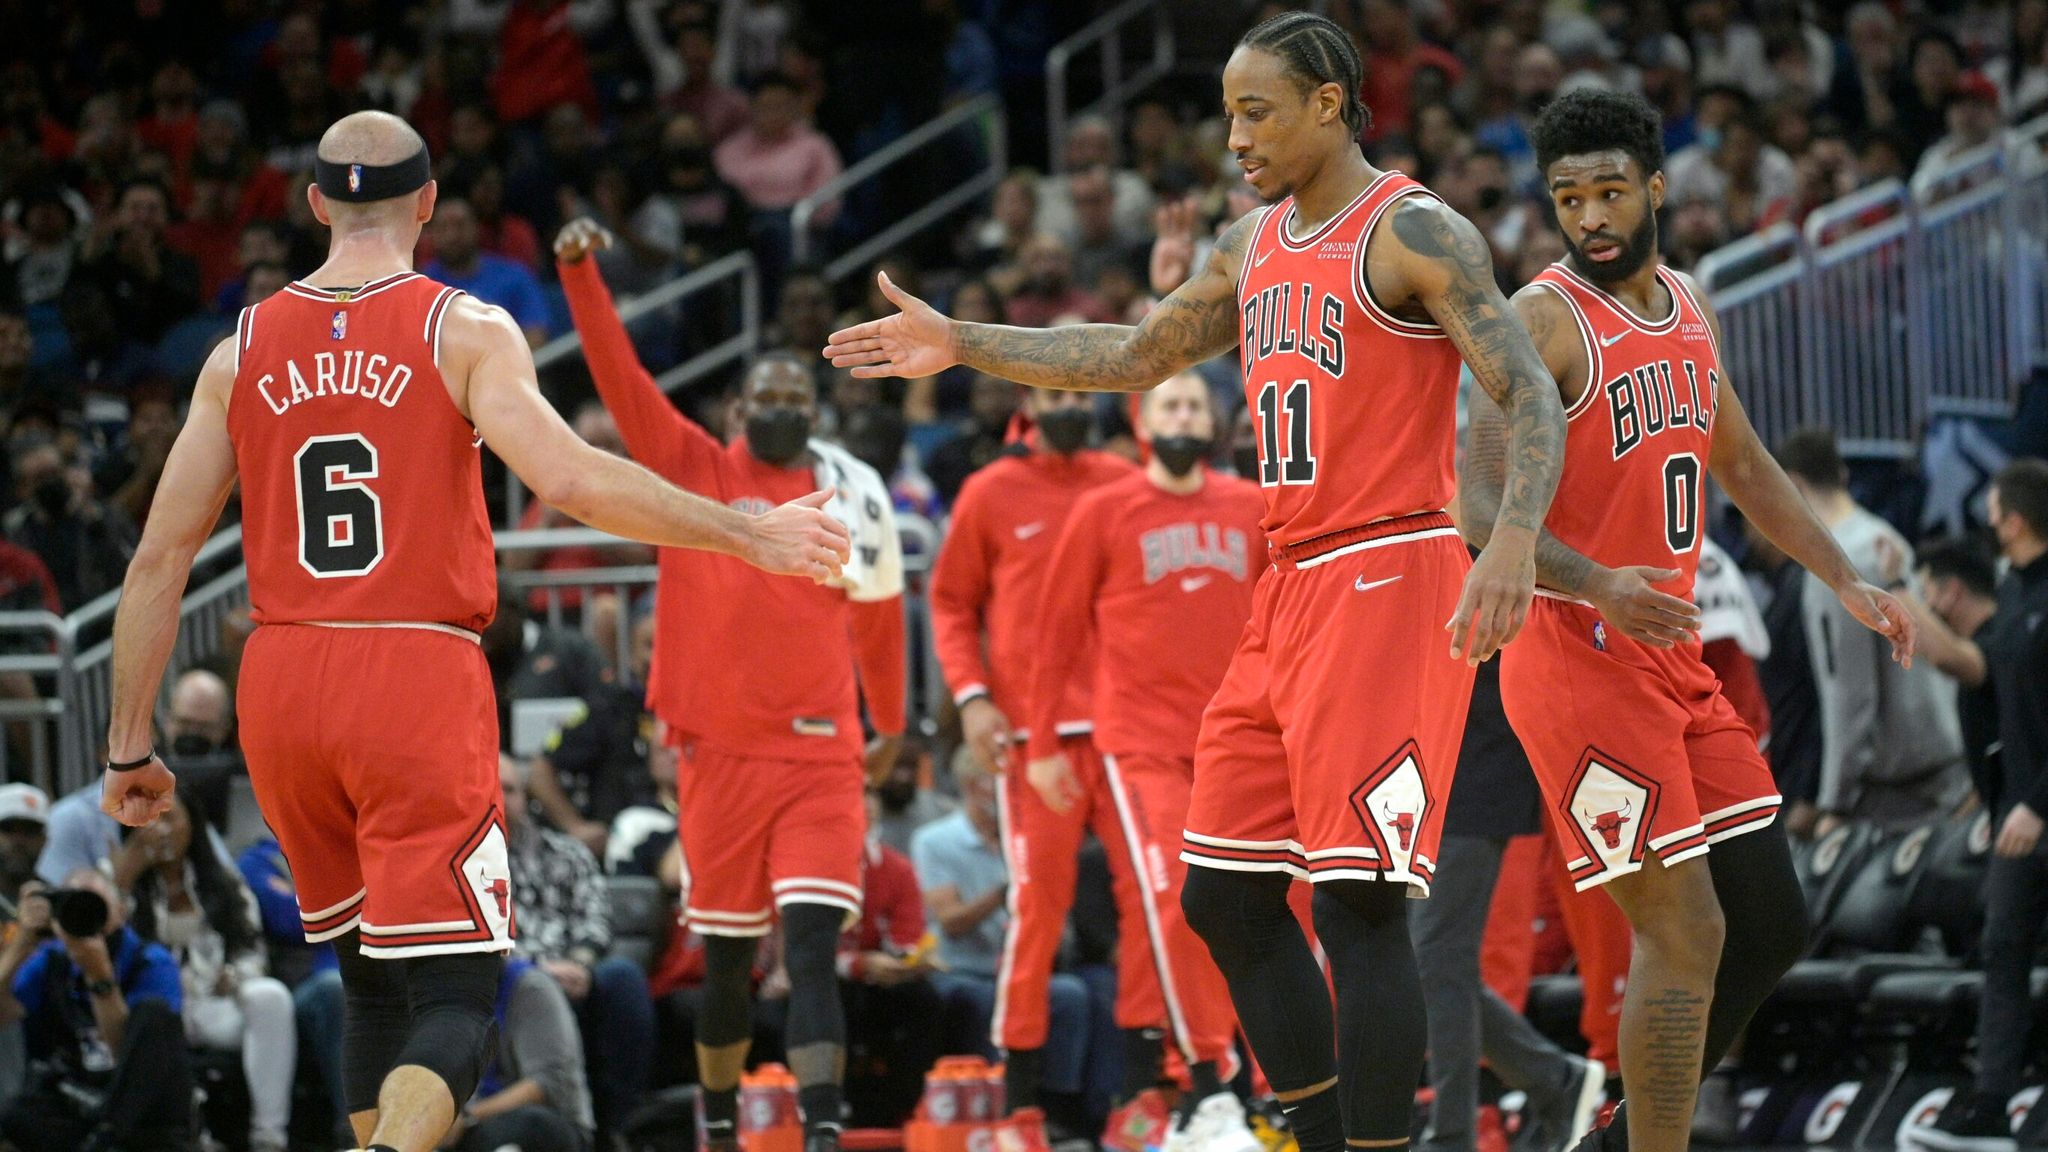 From Bulls to Bucks: Top five winners this past offseason through trades, signings and re-signing top talents | NBA News | Sky Sports